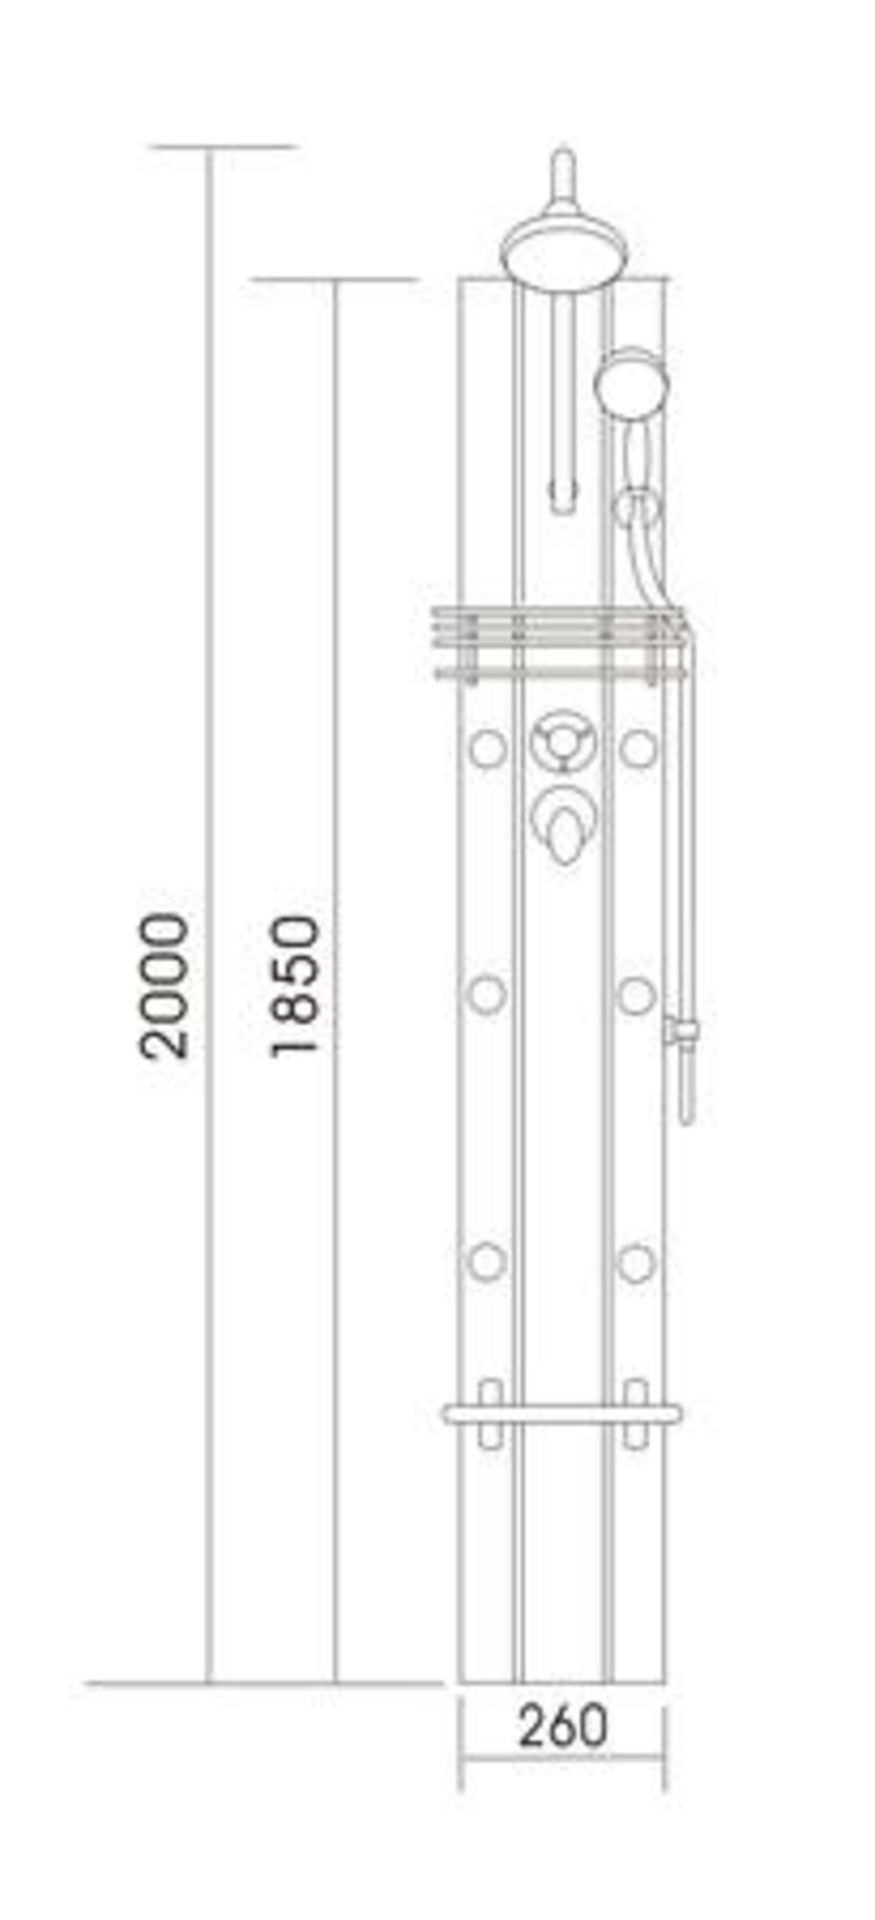 ADP16 2000mm x 260mm corner or mid wall shower panel, aluminium, rubber tipped overhead drencher, - Image 2 of 2